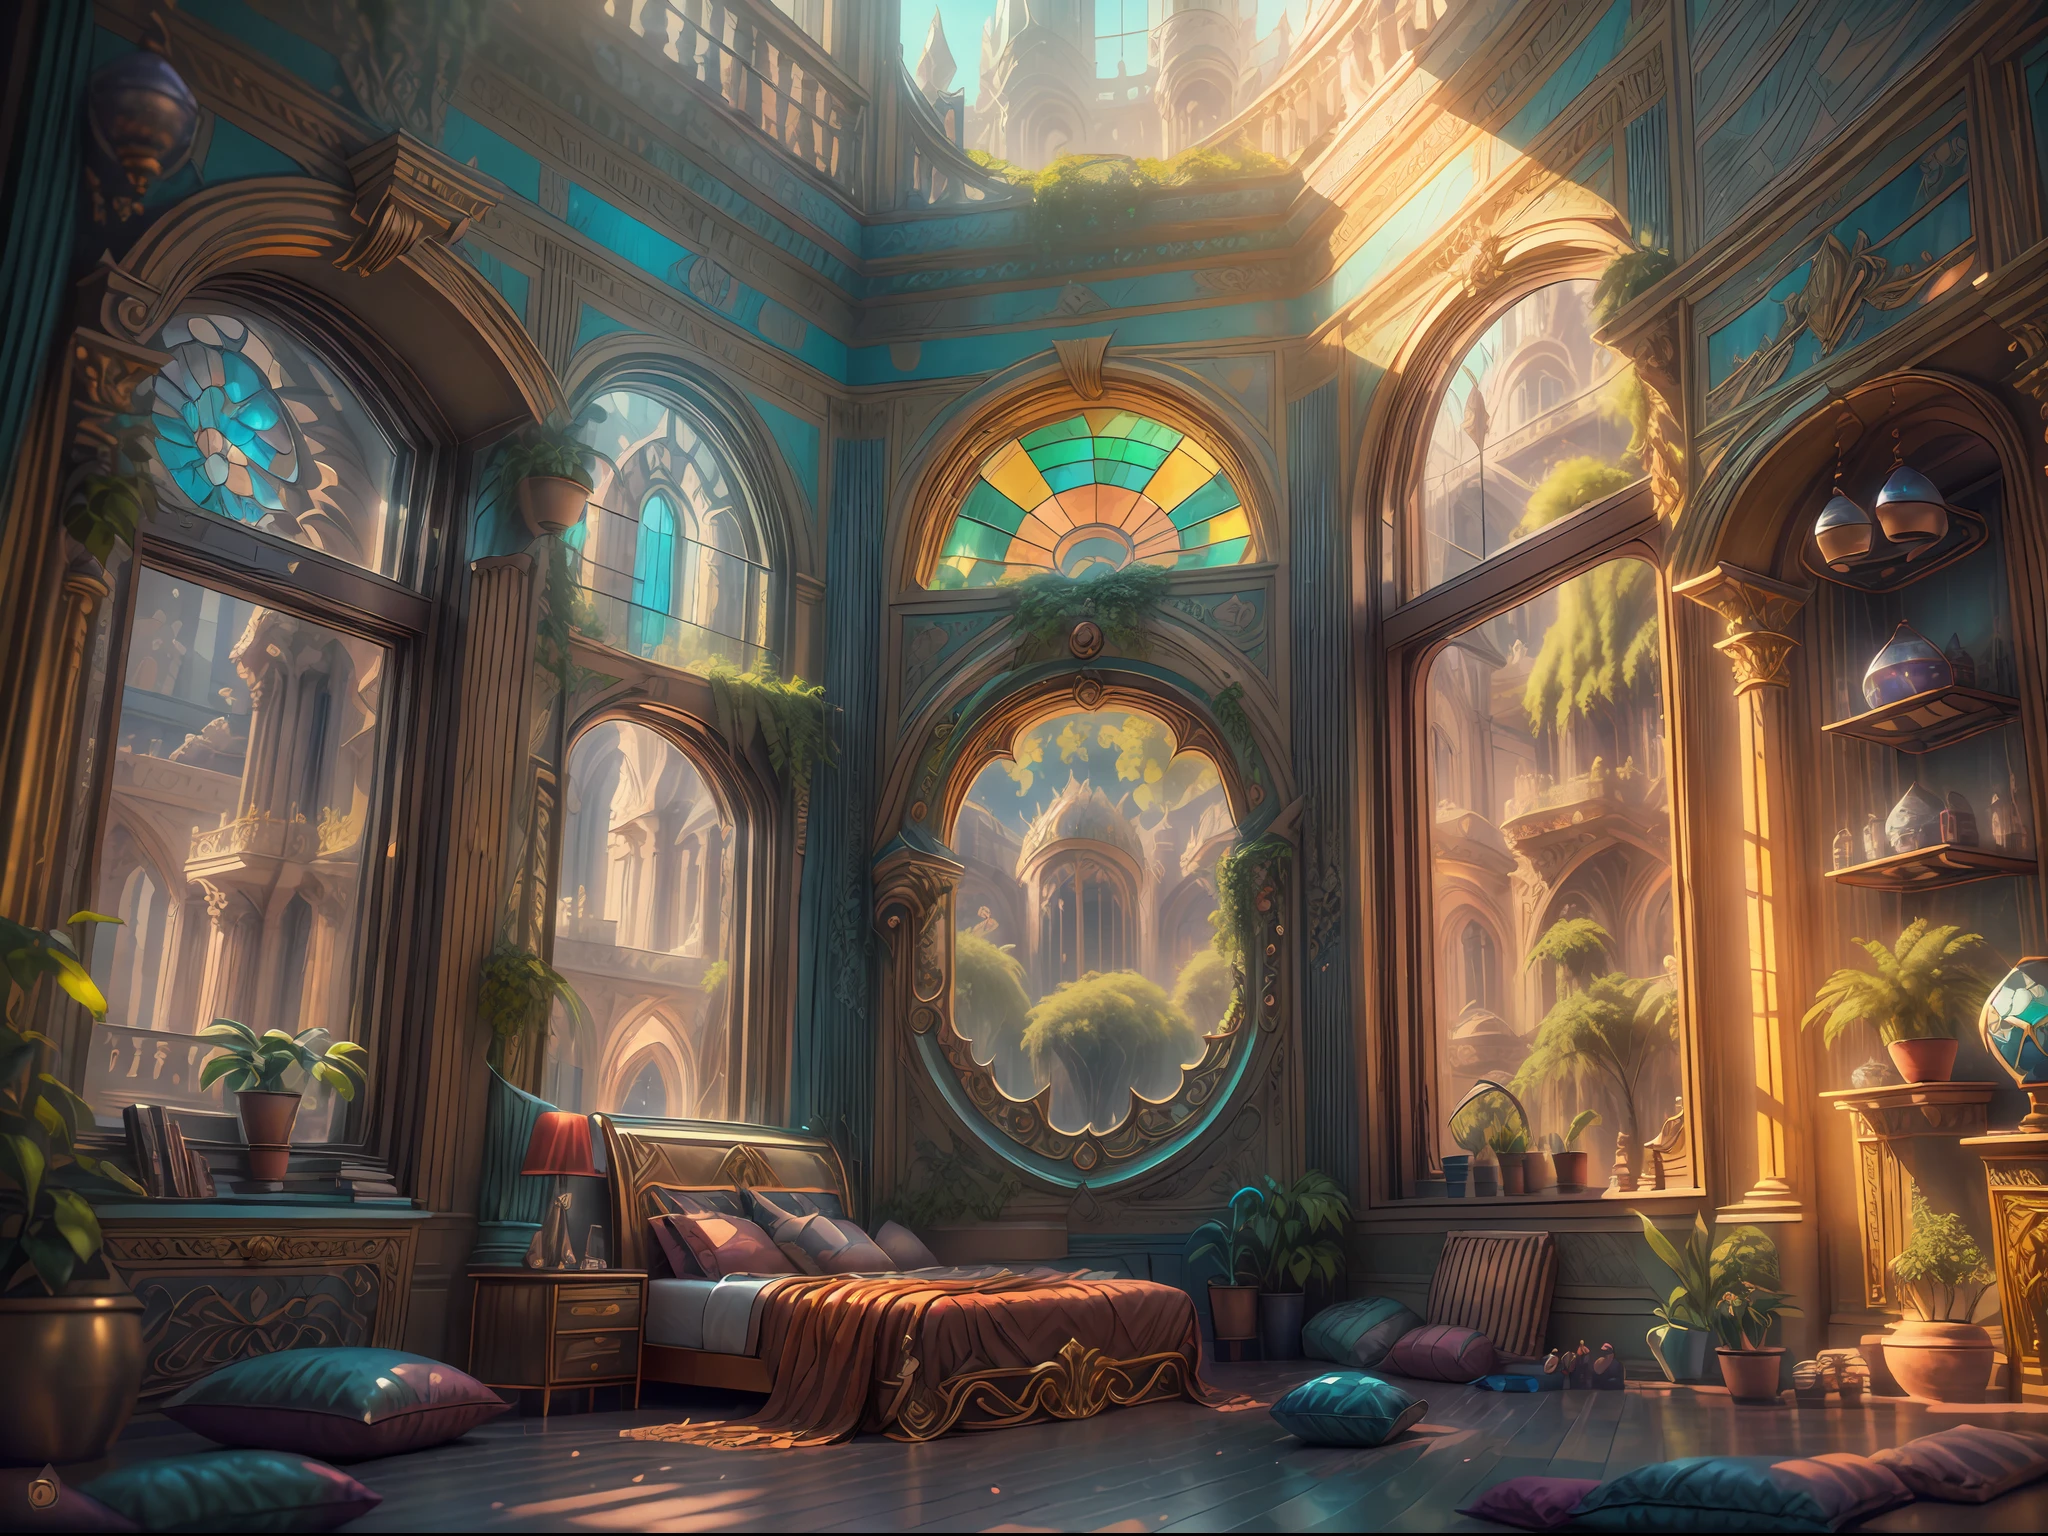 (((Generate an ornate bedroom in the style of Versailles with a big historical window.))) A hyperrealistic solarpunk dreamscape cityscape is in the window. The cityscape is extremely detailed with many colors and buildings of many different sizes. The cityscape has all colors of the rainbow and has hires interesting solarpunk details seen through the window)). It is peaceful in the bedroom. The entire artwork is very realistic with many small details and enhancements. 3D render beeple, artstation and beeple highly, in fantasy sci-fi city, inspired by beeple, 8k, unreal engine unity CGI. Masterpiece and popular. Add many fantastical and beautiful details and nuances. Lighting: Crisp, clear lighting that emphasizes the realism of the piece. Camera: Dynamic composition.